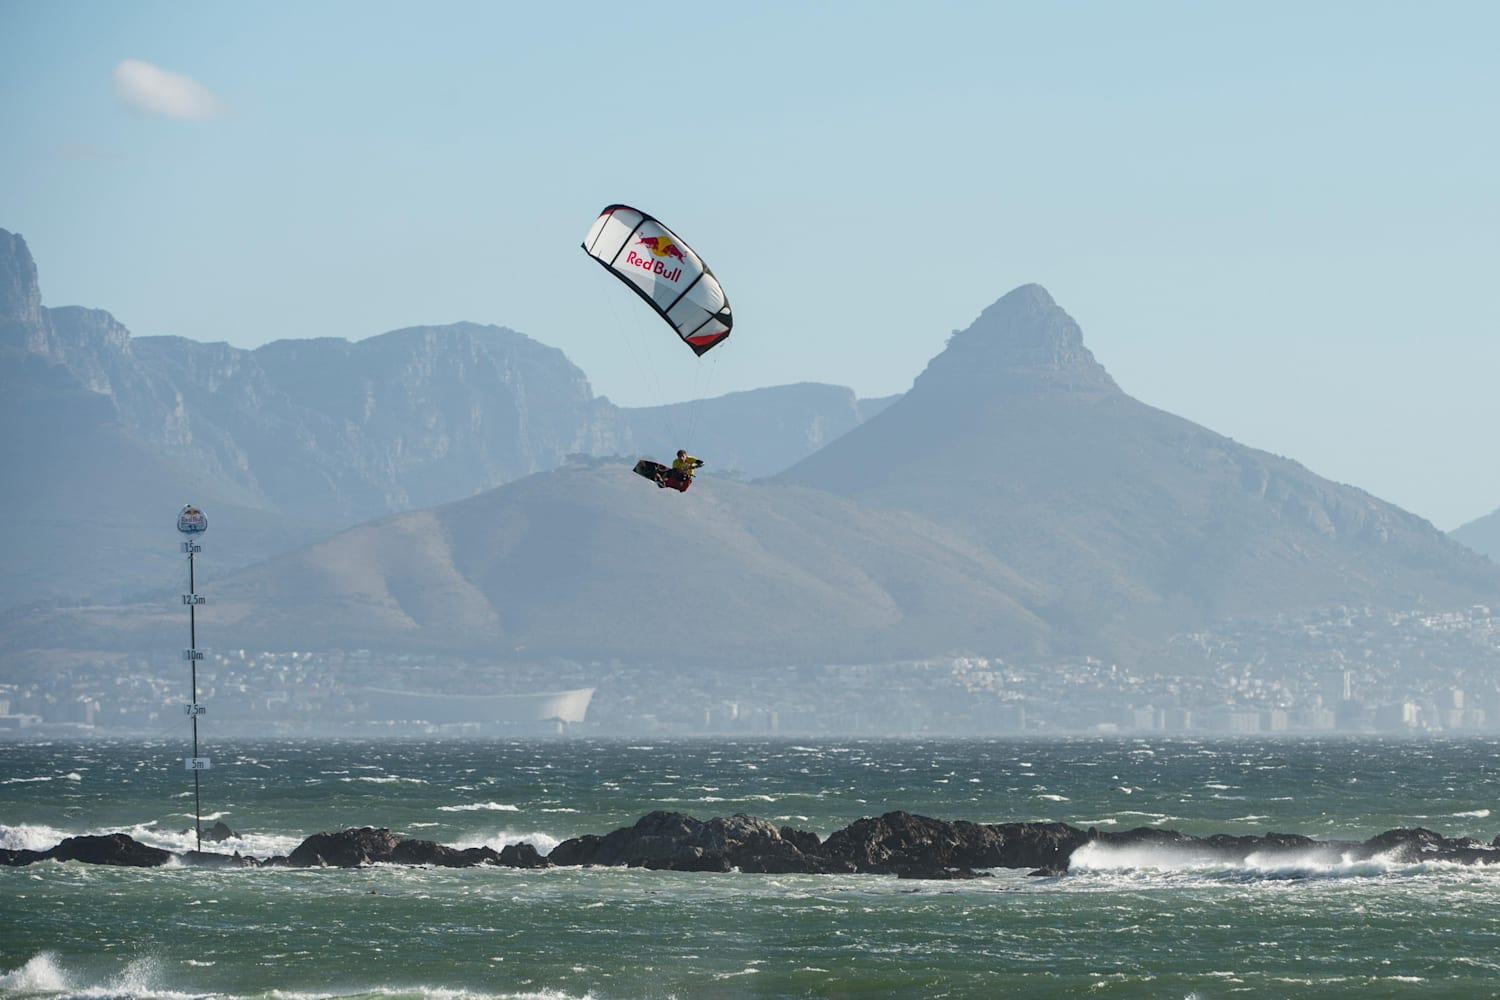 Red Bull King of the Air 2015 event details